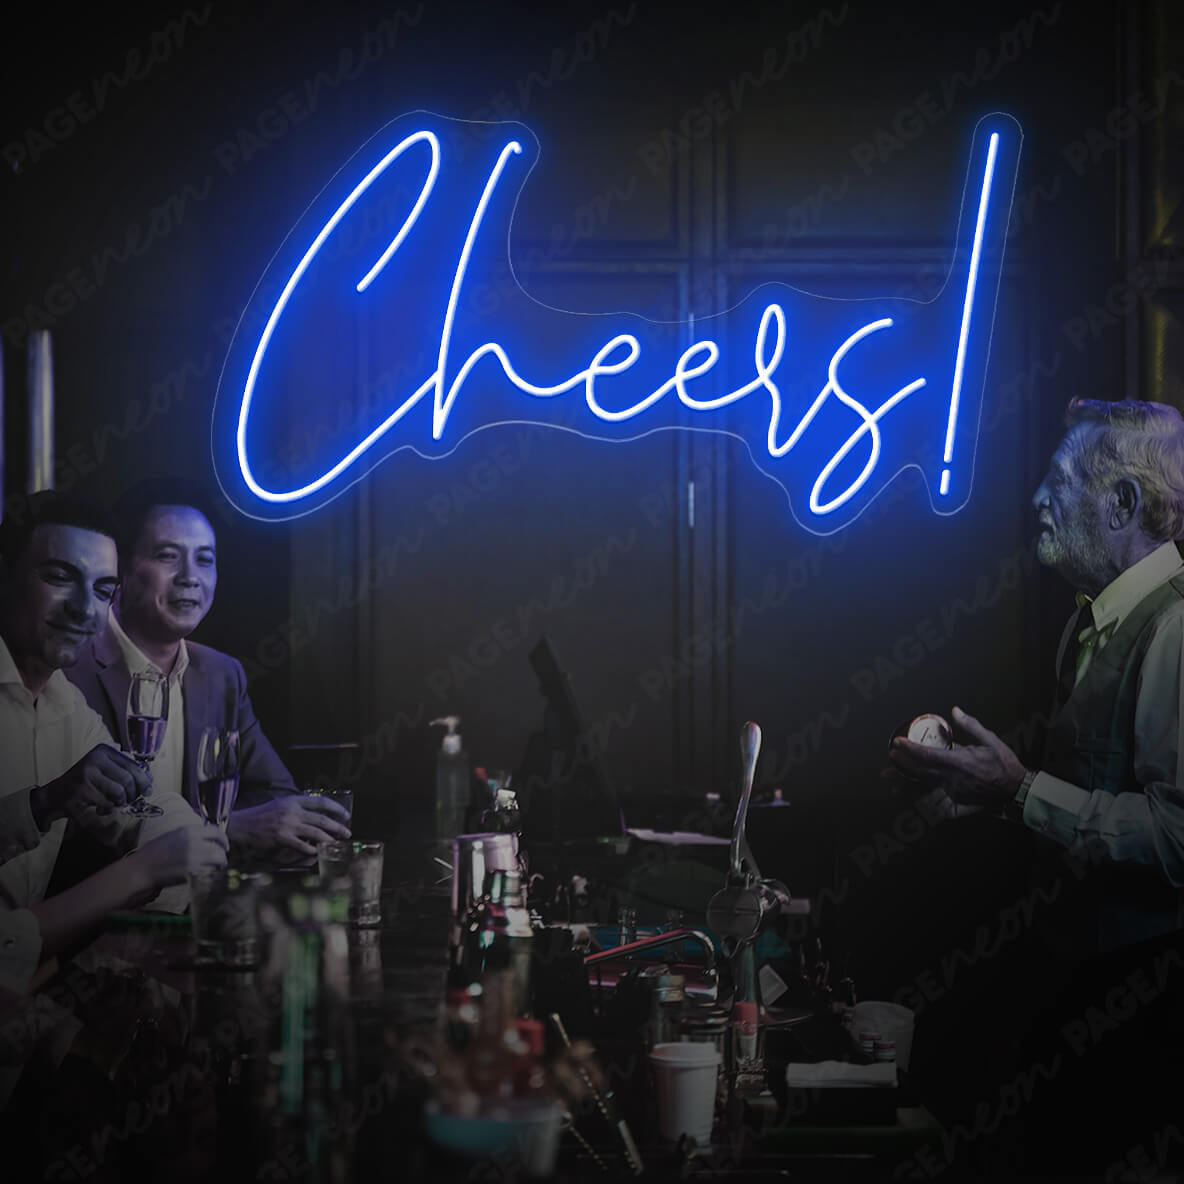 Cheers Neon Sign Bar Led Light Blue